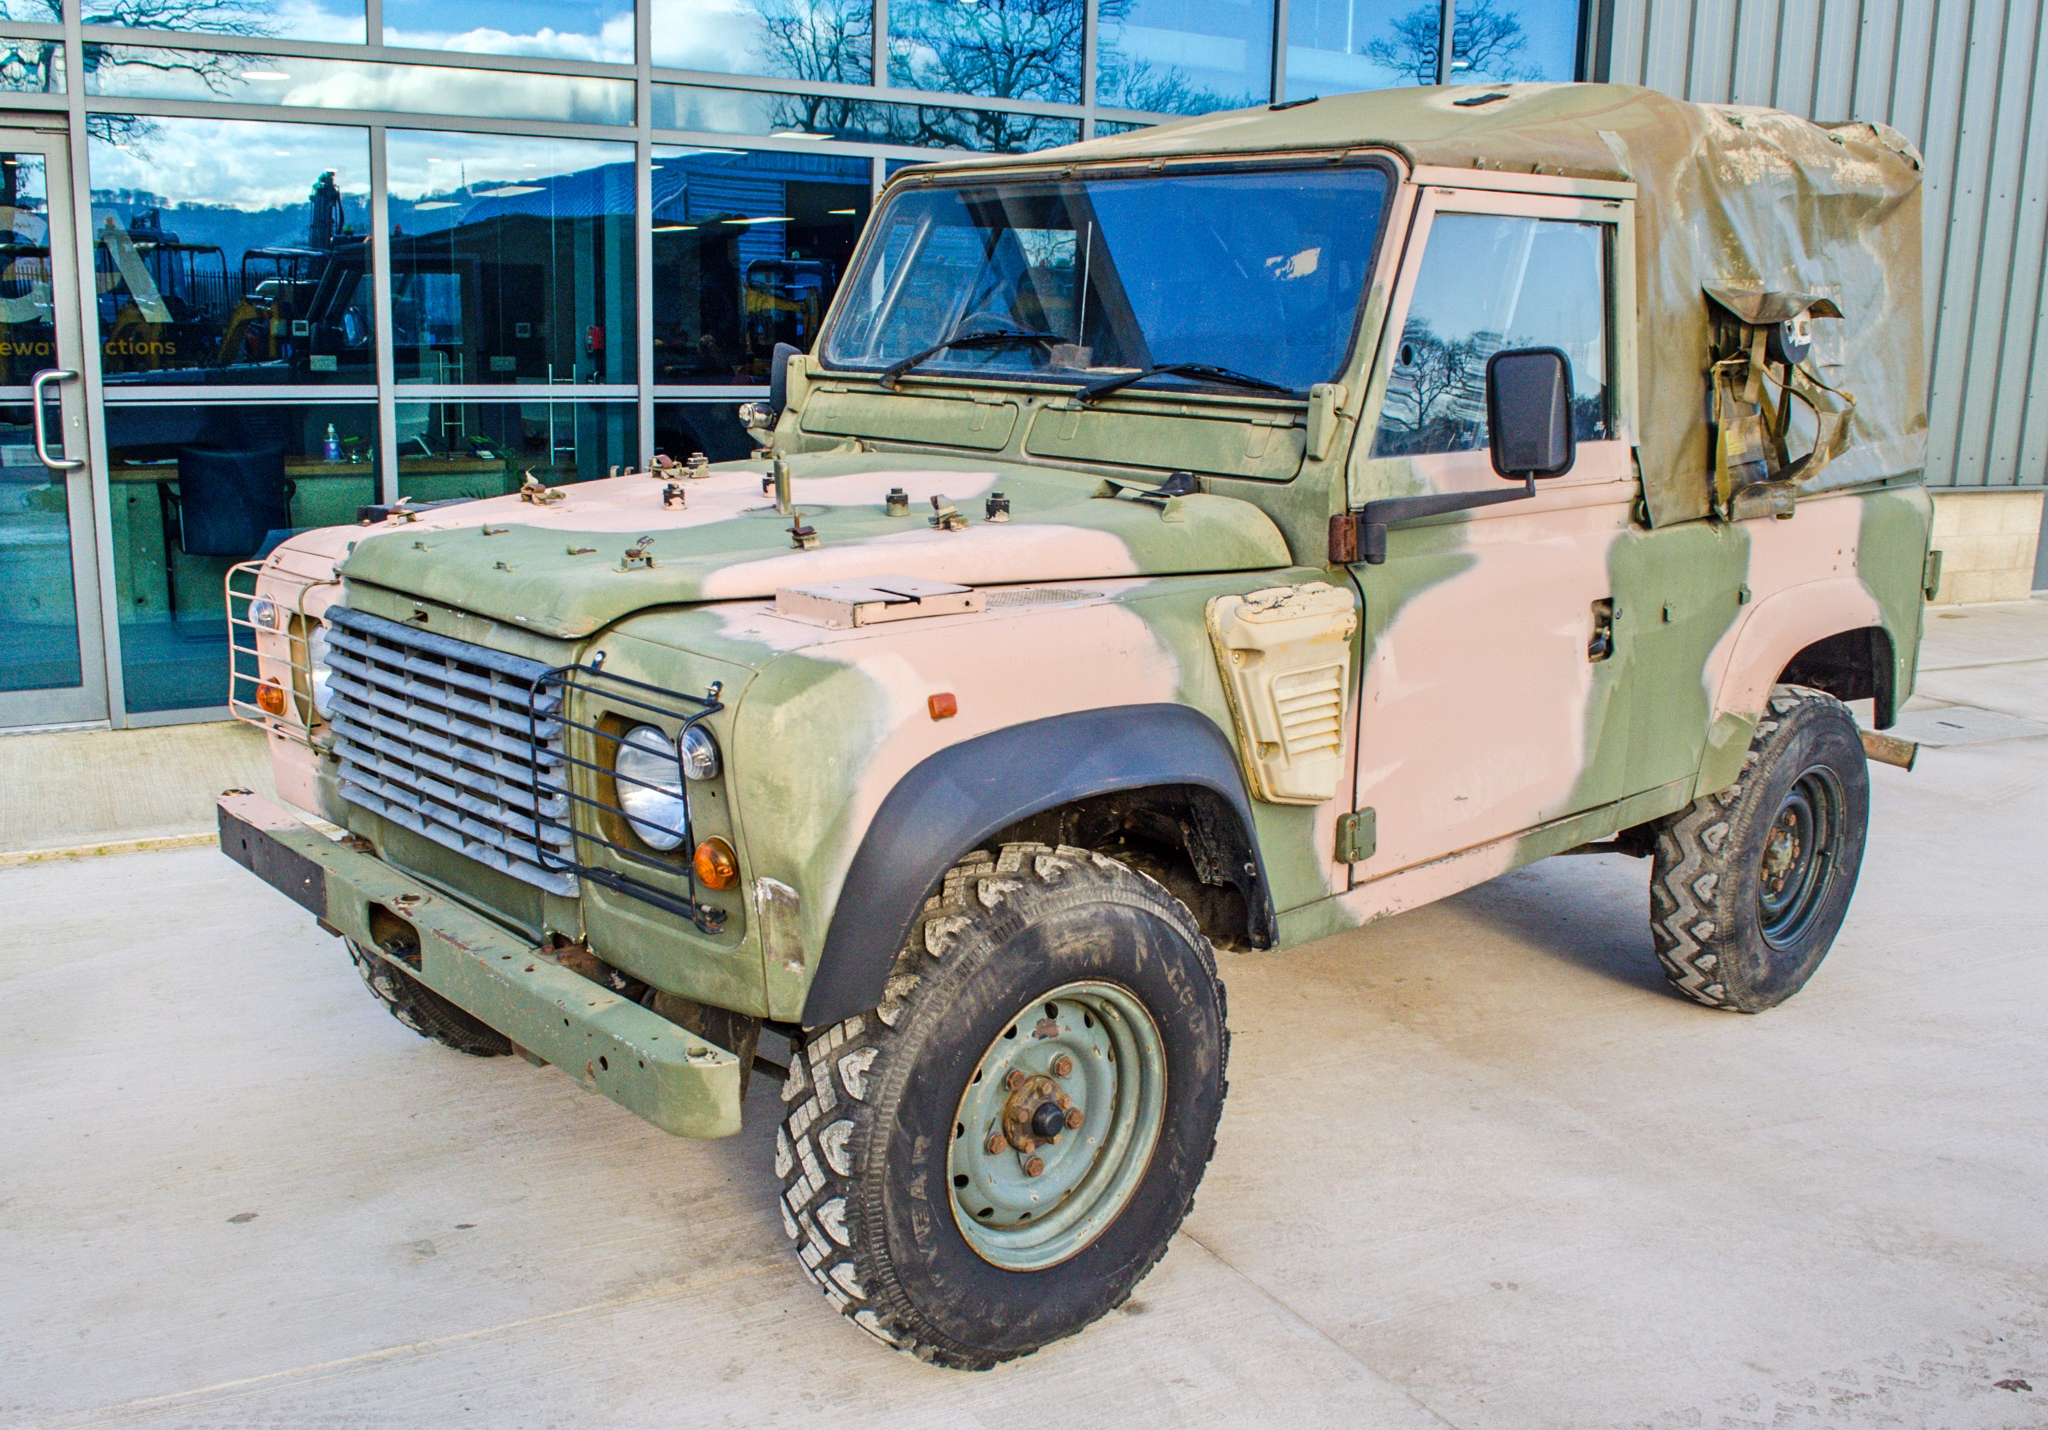 1998 Land Rover Defender 90 WOLF 2,5 litre 300TDI 4 wheel drive utility vehicle Ex MOD - Image 4 of 44